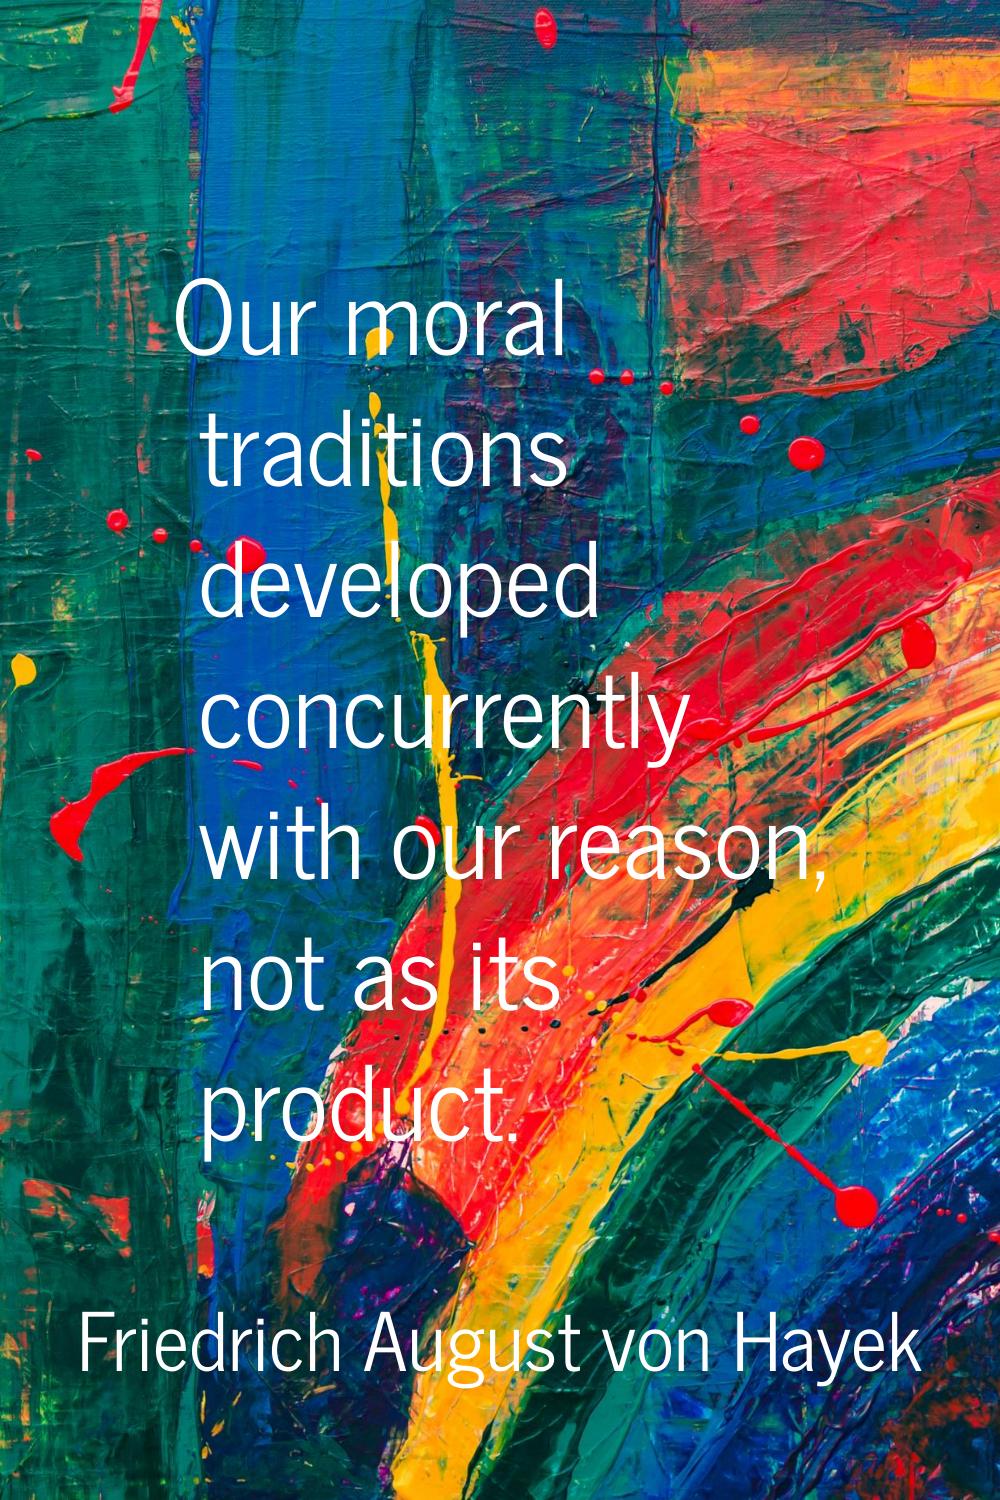 Our moral traditions developed concurrently with our reason, not as its product.